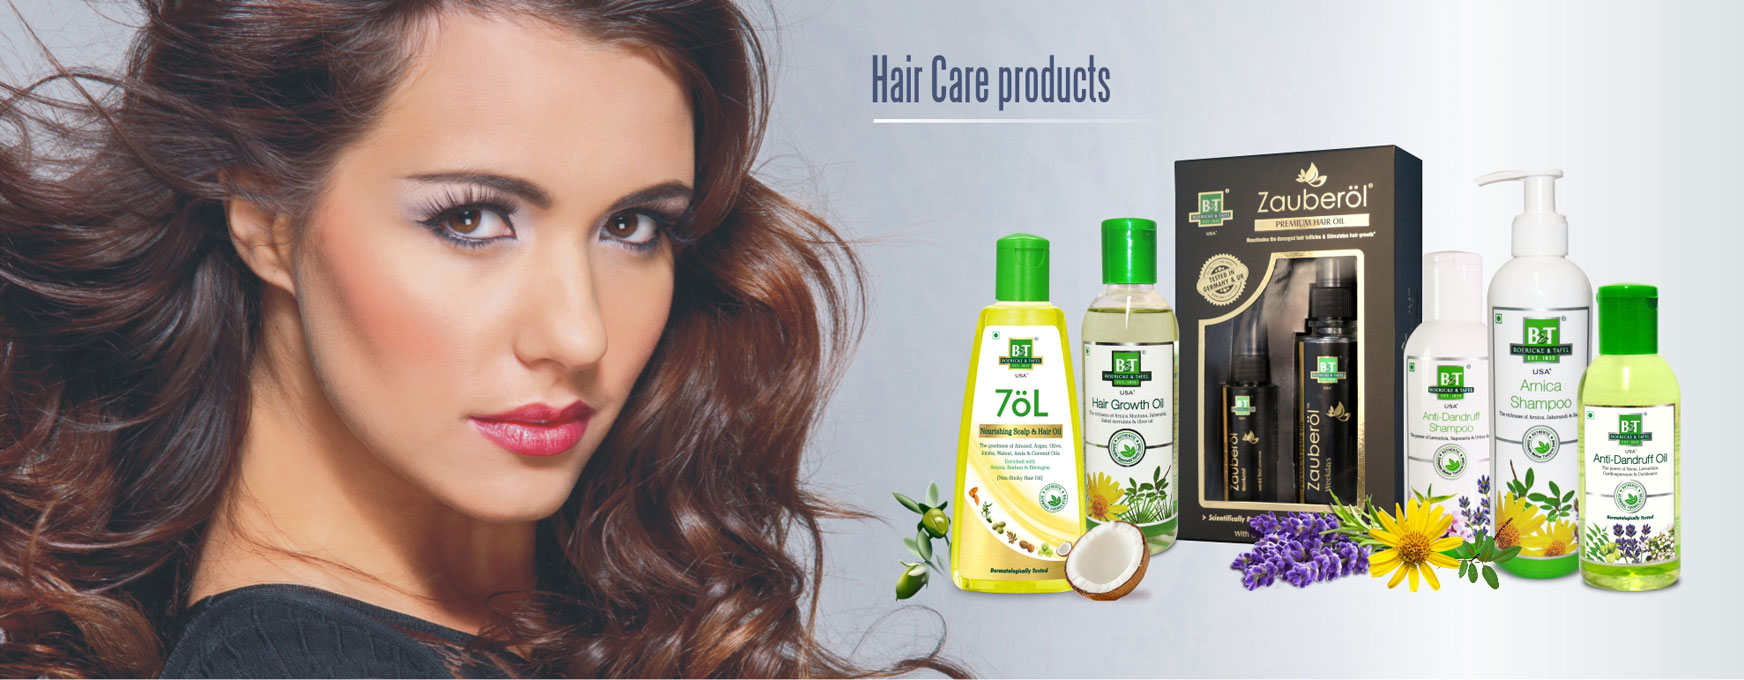 Buy Hair Care Products Online